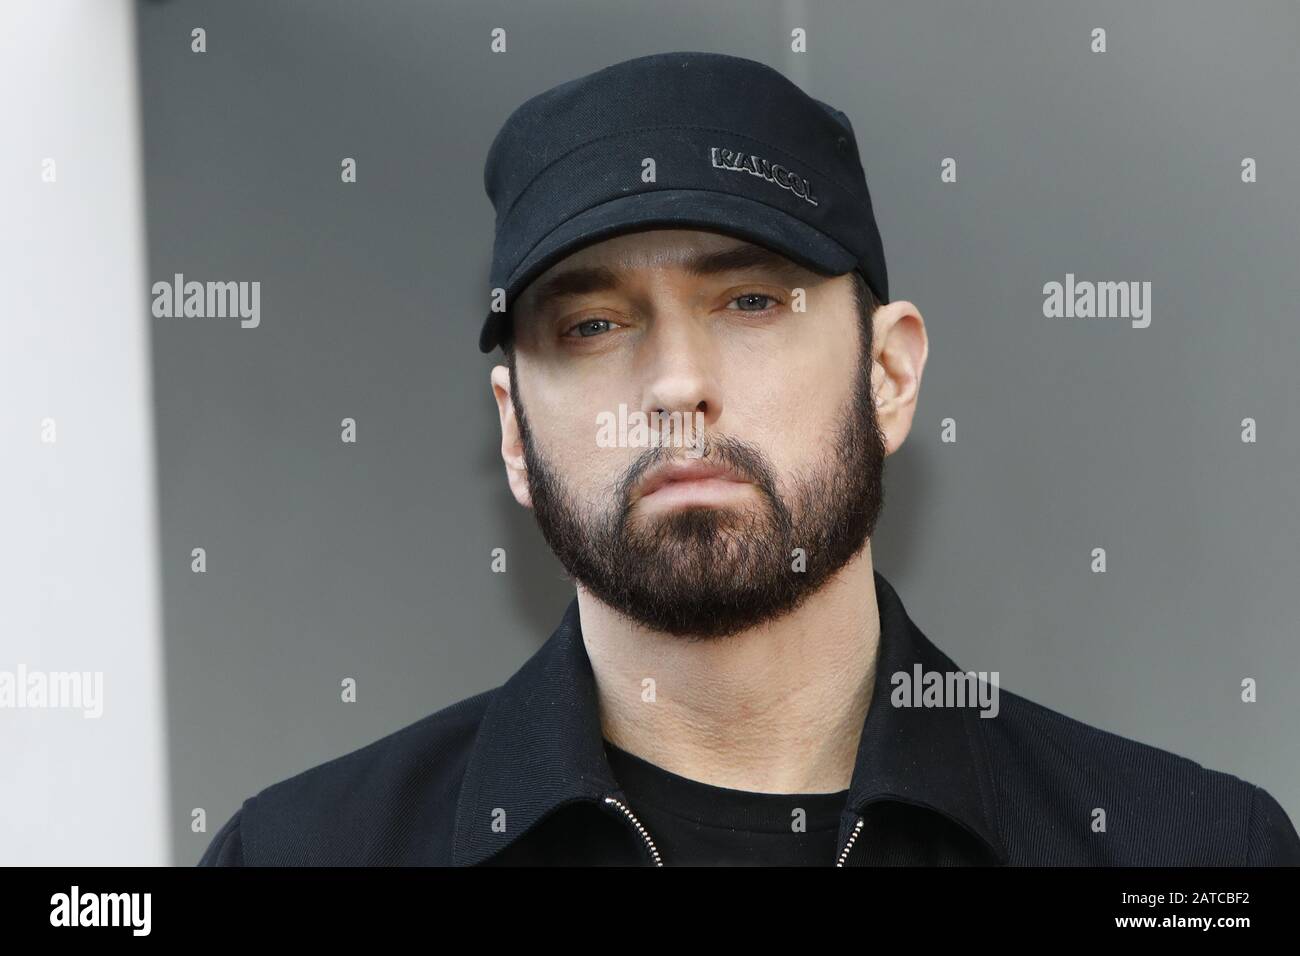 January 30, 2020, Los Angeles, CA, USA: LOS ANGELES - JAN 30:  Eminem, Marshall Bruce Mathers III at the 50 Cent Star Ceremony on the Hollywood Walk of Fame on January 30, 2019 in Los Angeles, CA (Credit Image: © Kay Blake/ZUMA Wire) Stock Photo